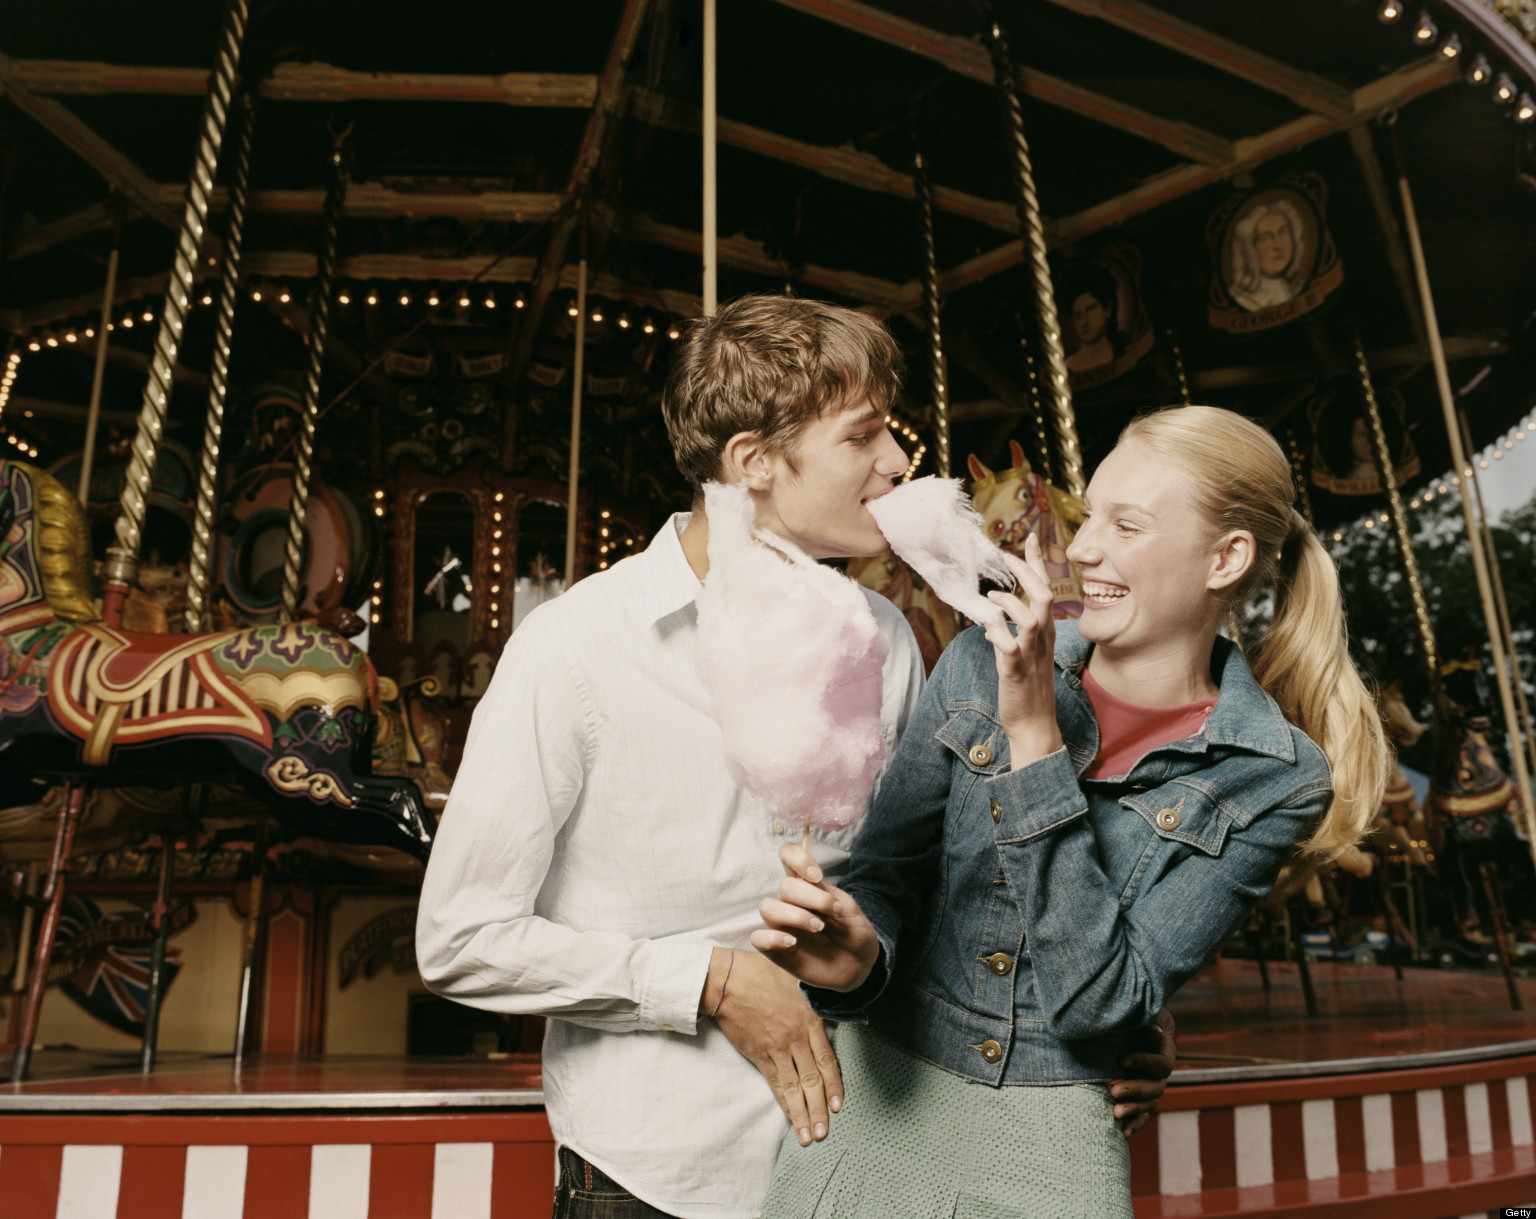 Plan a Perfect Date and We’ll Hook You up With a Hot Celeb Boyfriend! Teenage Couple Carousel Carnival